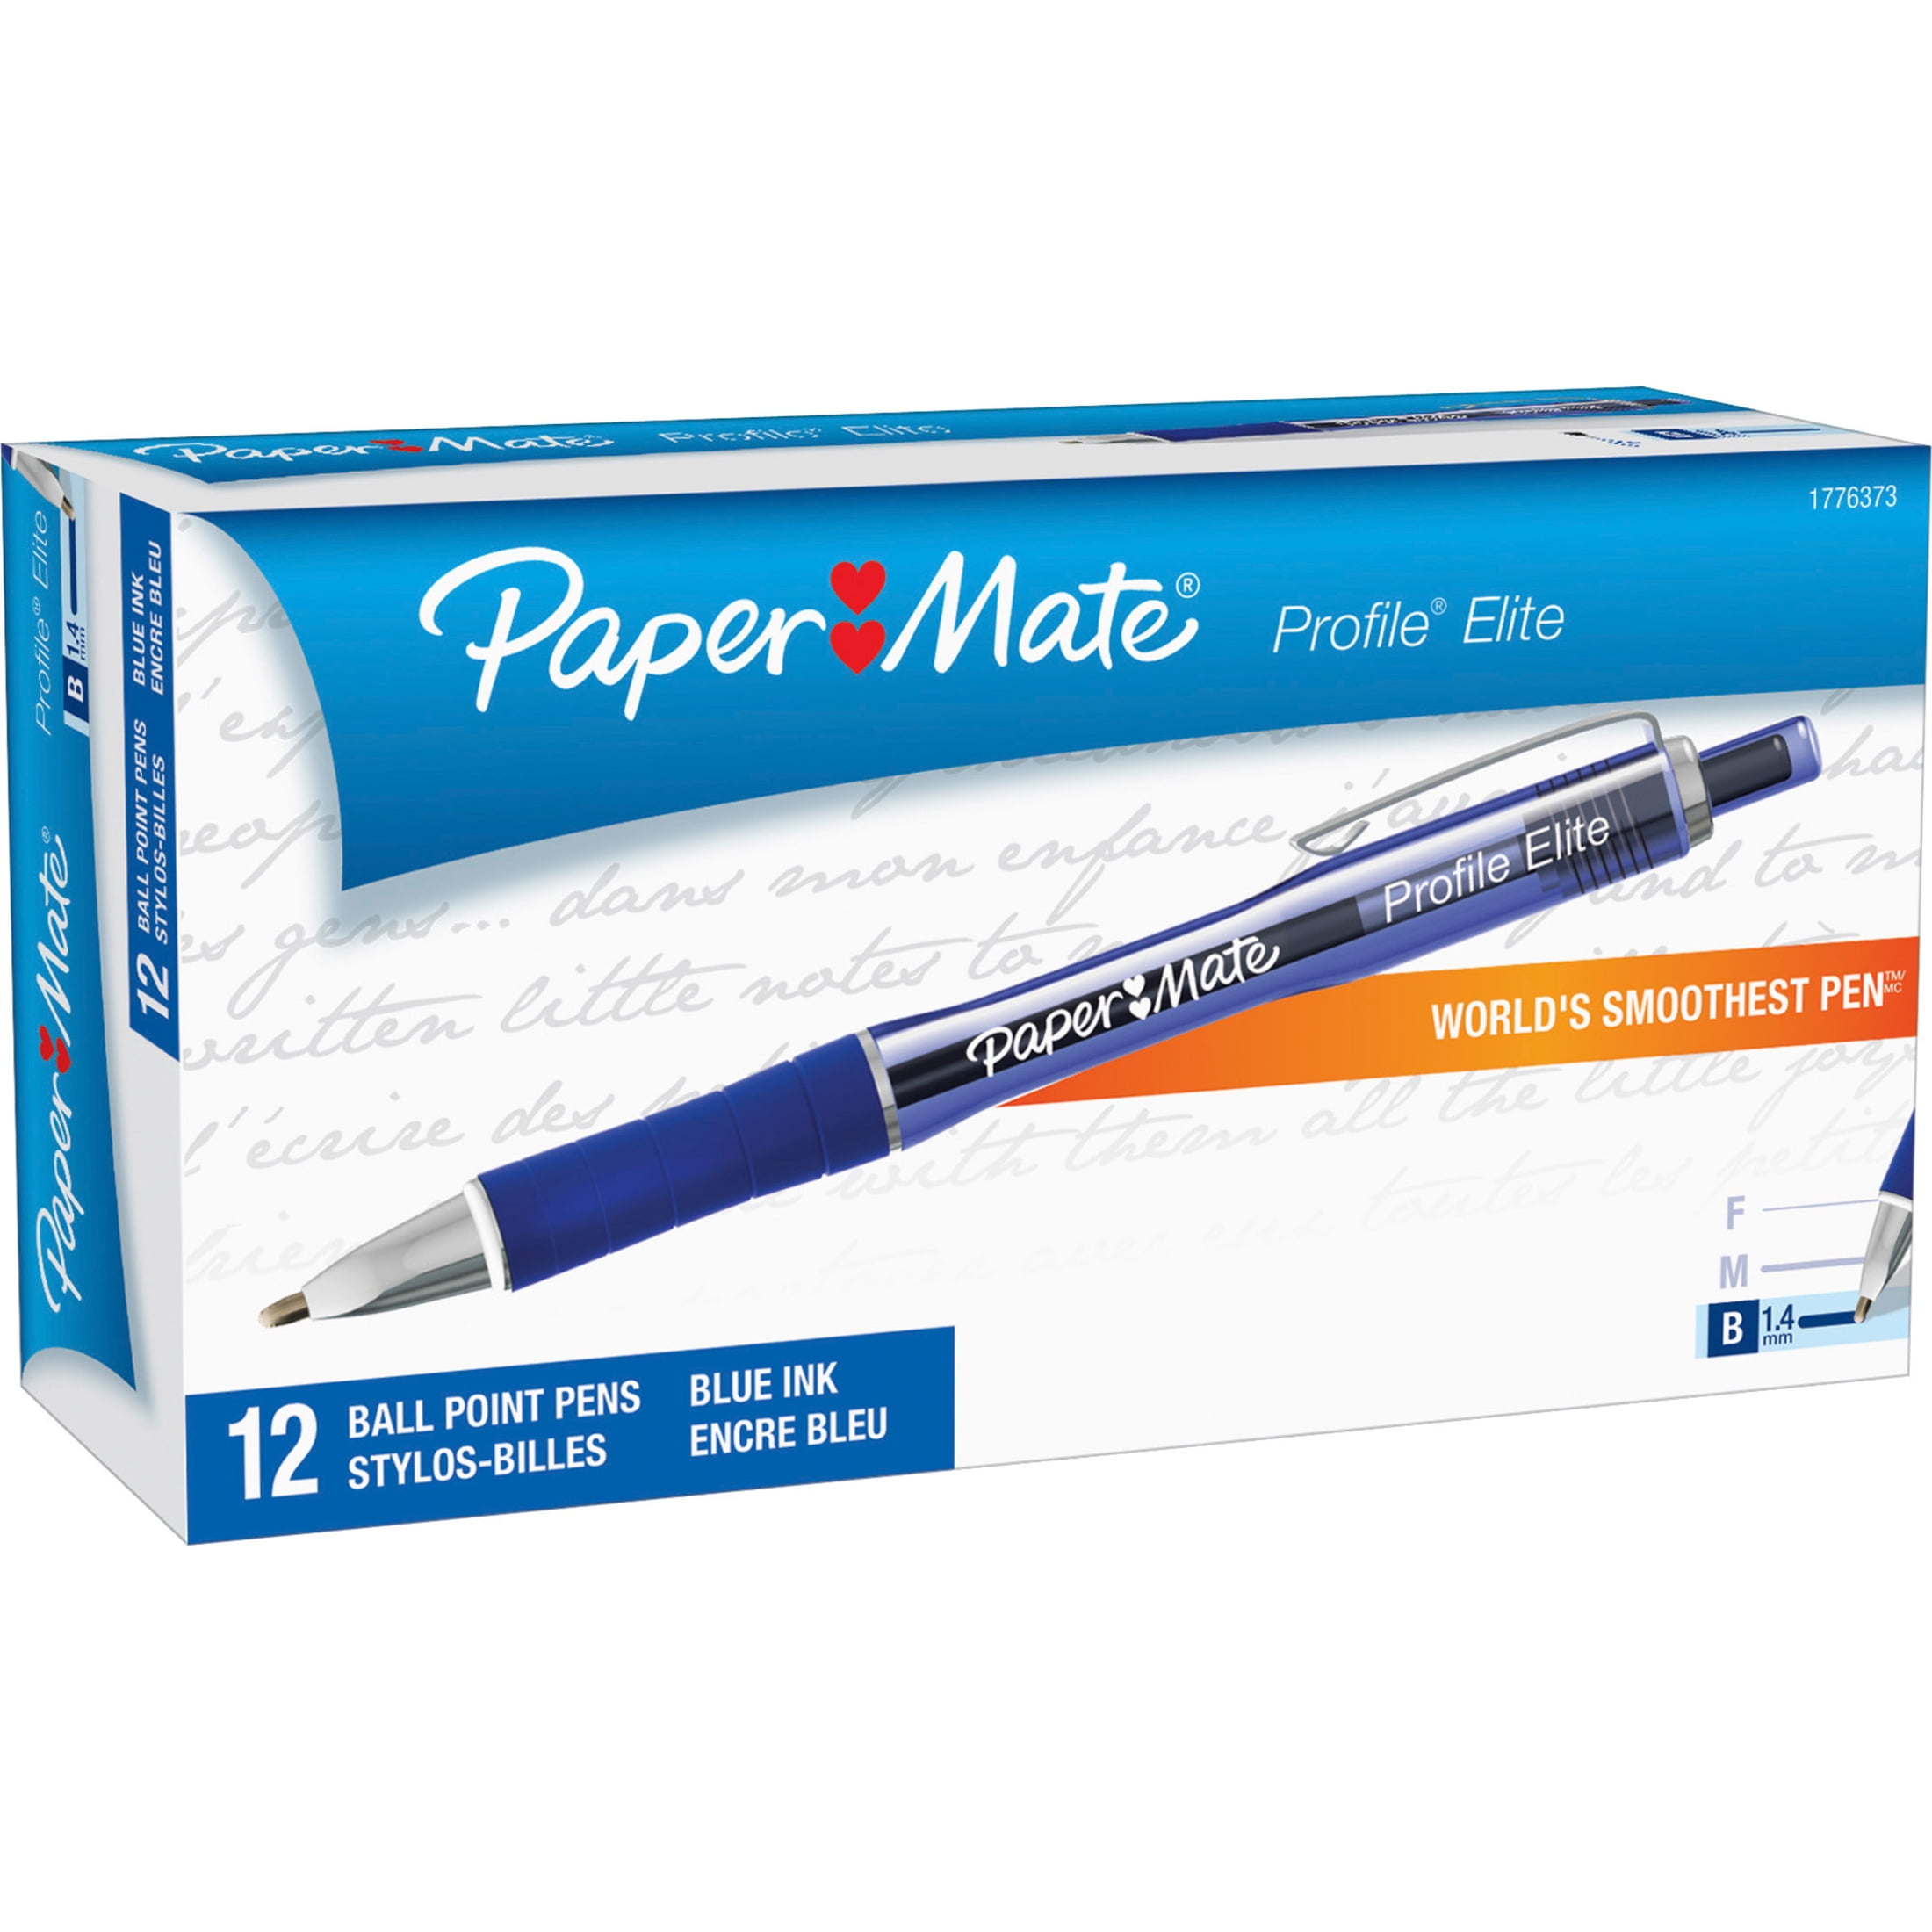 How funny is Paper Mateâ€™s new Pen Campaign? - My Site